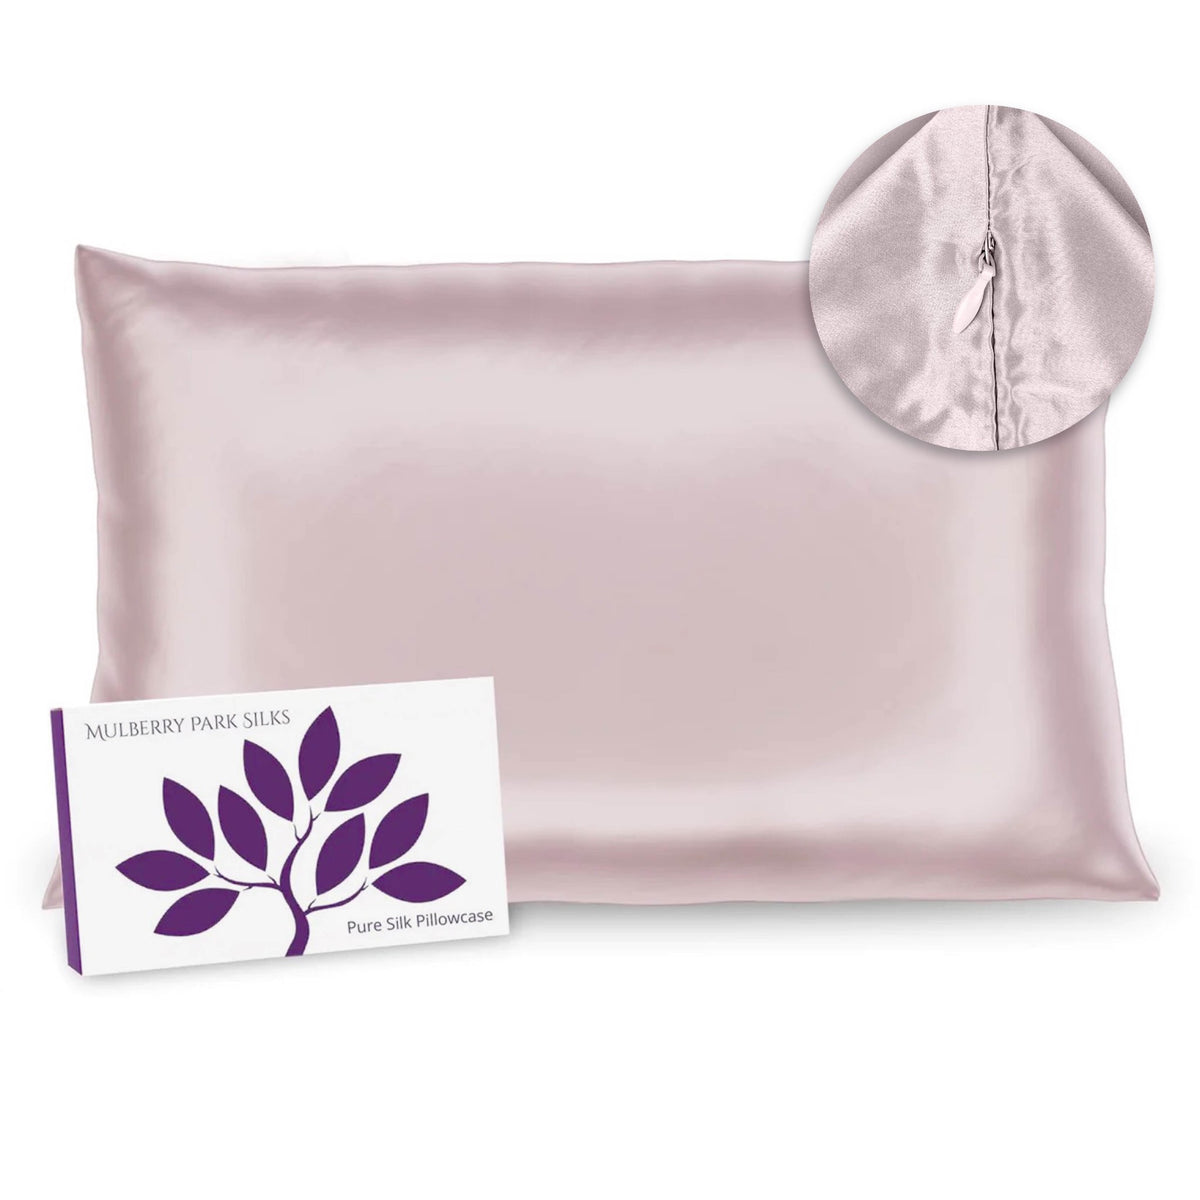 Zoom of Hidden Zipper of Mulberry Park Silks Deluxe 19 Momme Pure Silk Pillowcase in Pink Color with Box